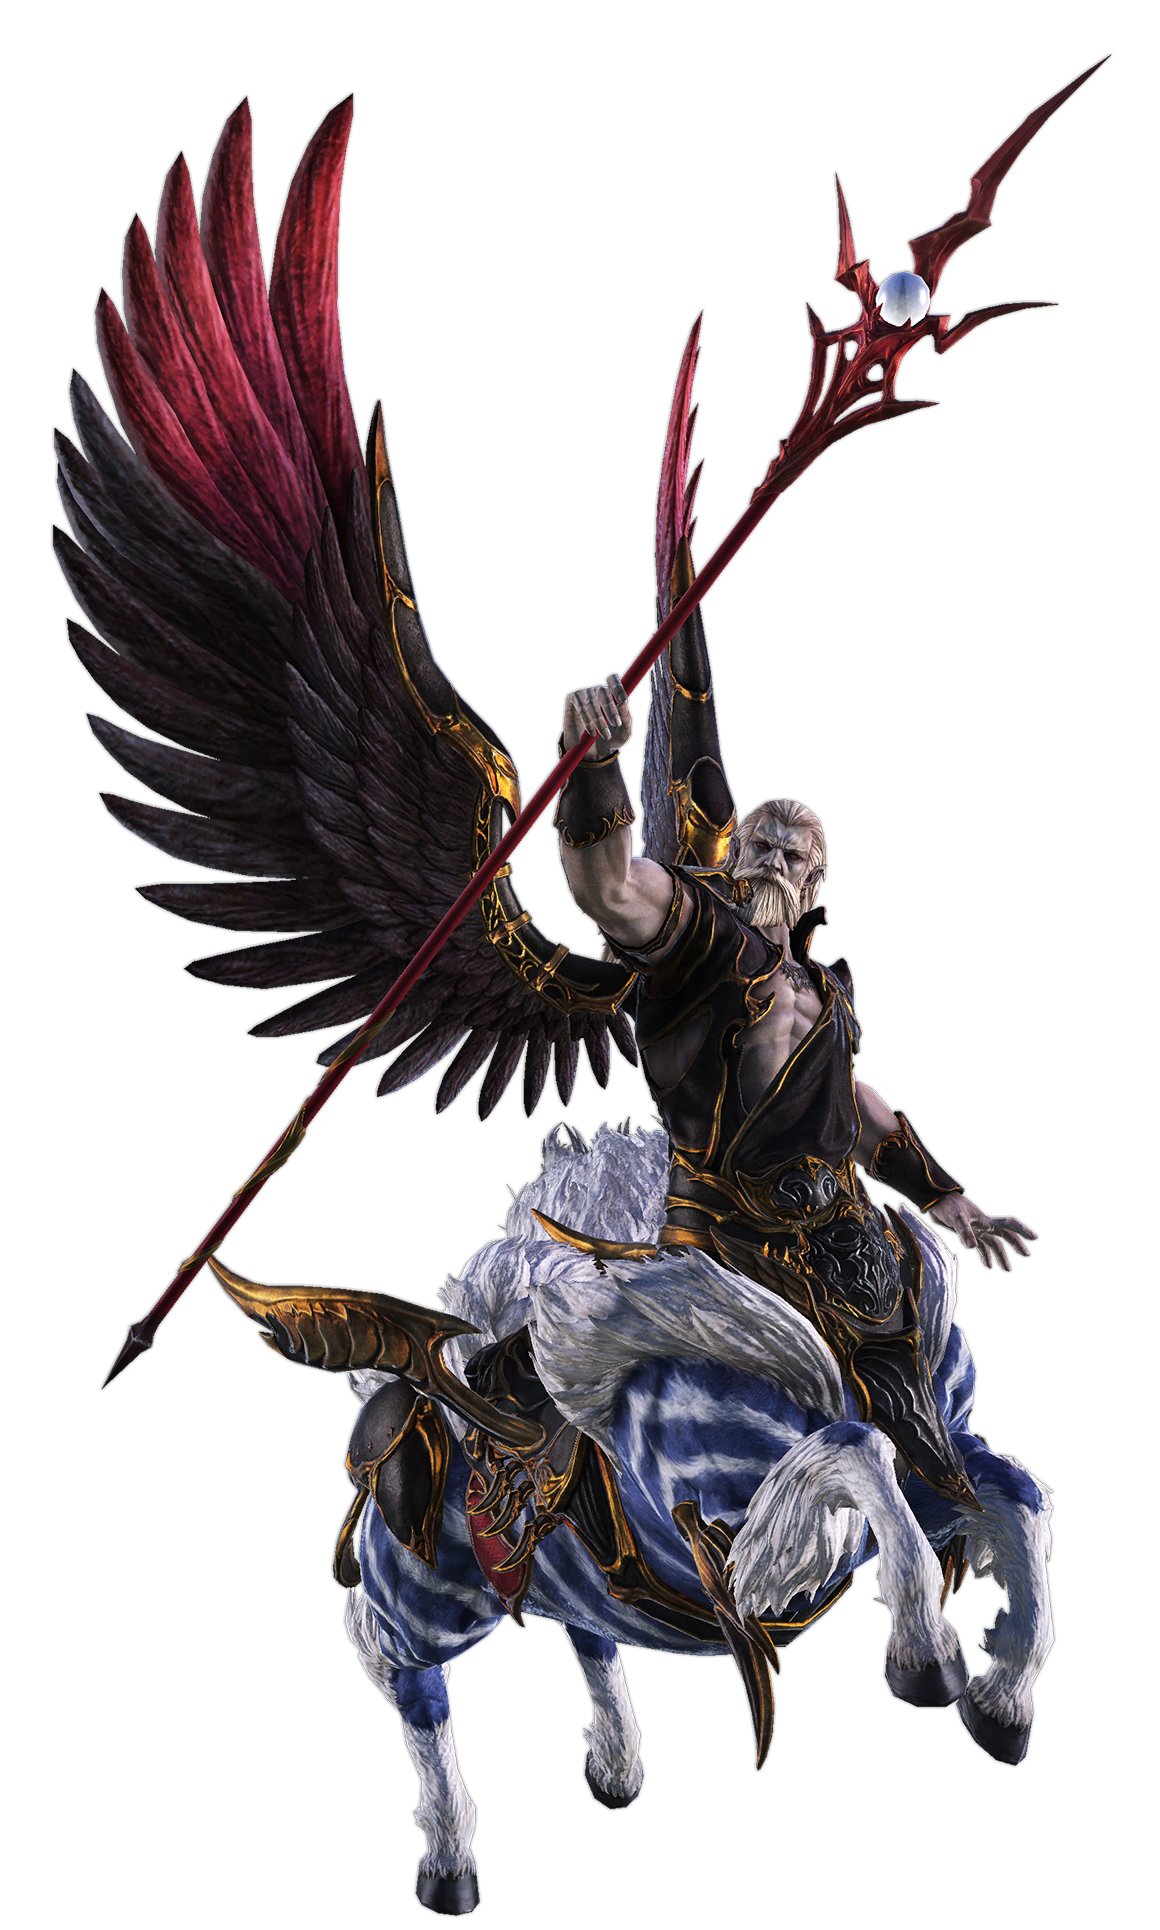 “Ramuh, Garuda, and Ifrit return with some new tricks in Eden’s Verse, #FFX...